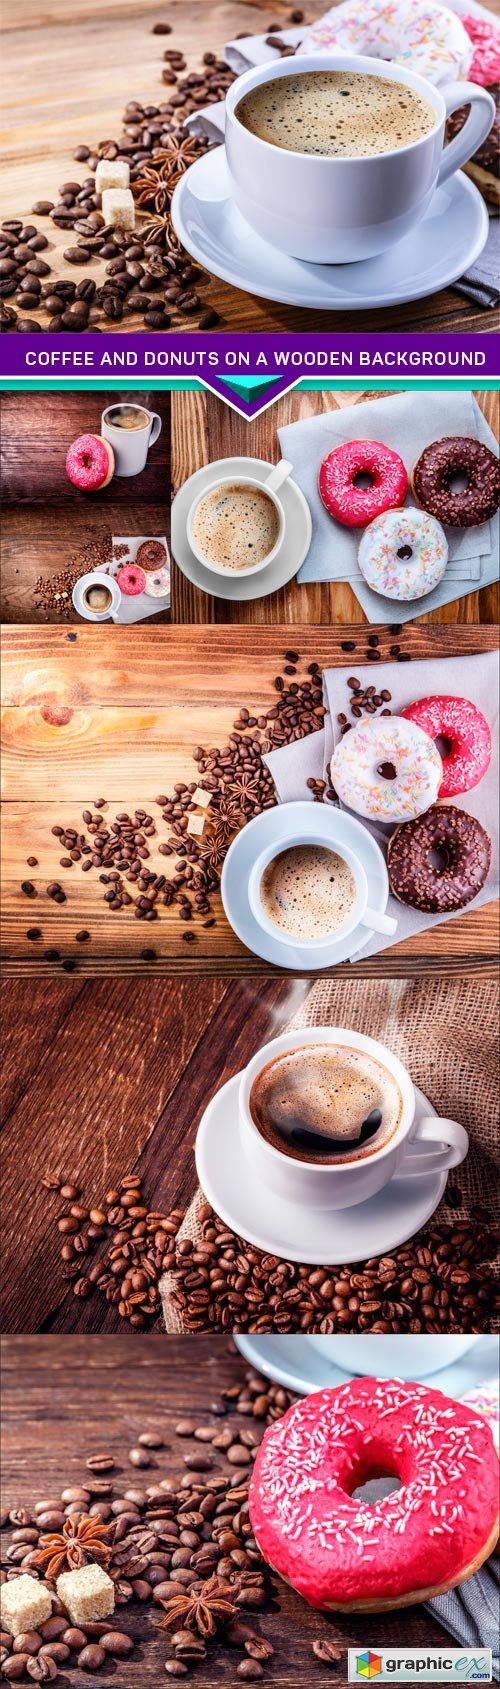 Grain coffee and donuts on a wooden background 7X JPEG